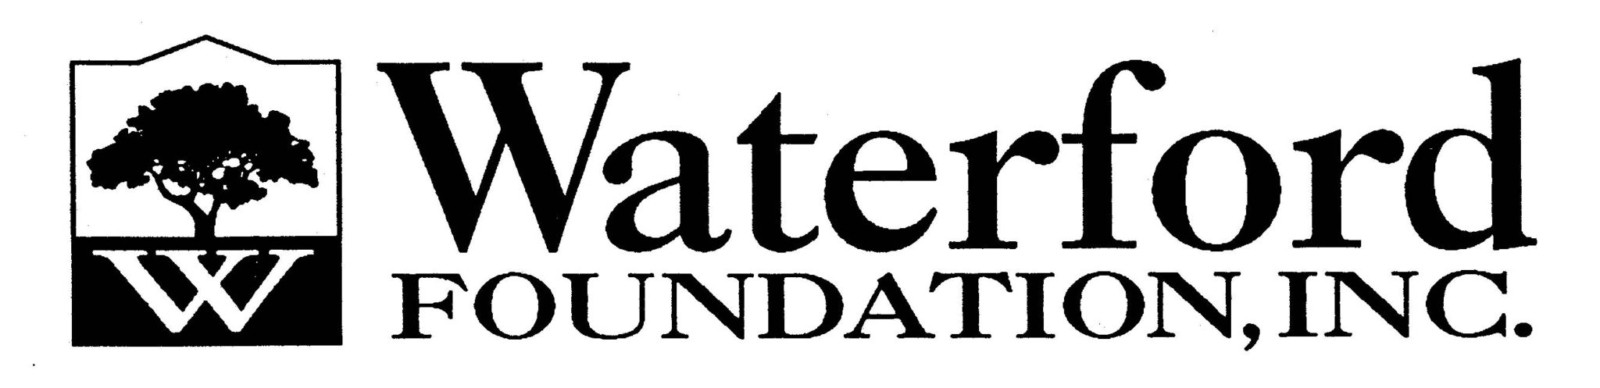 WATERFORD FOUNDATION